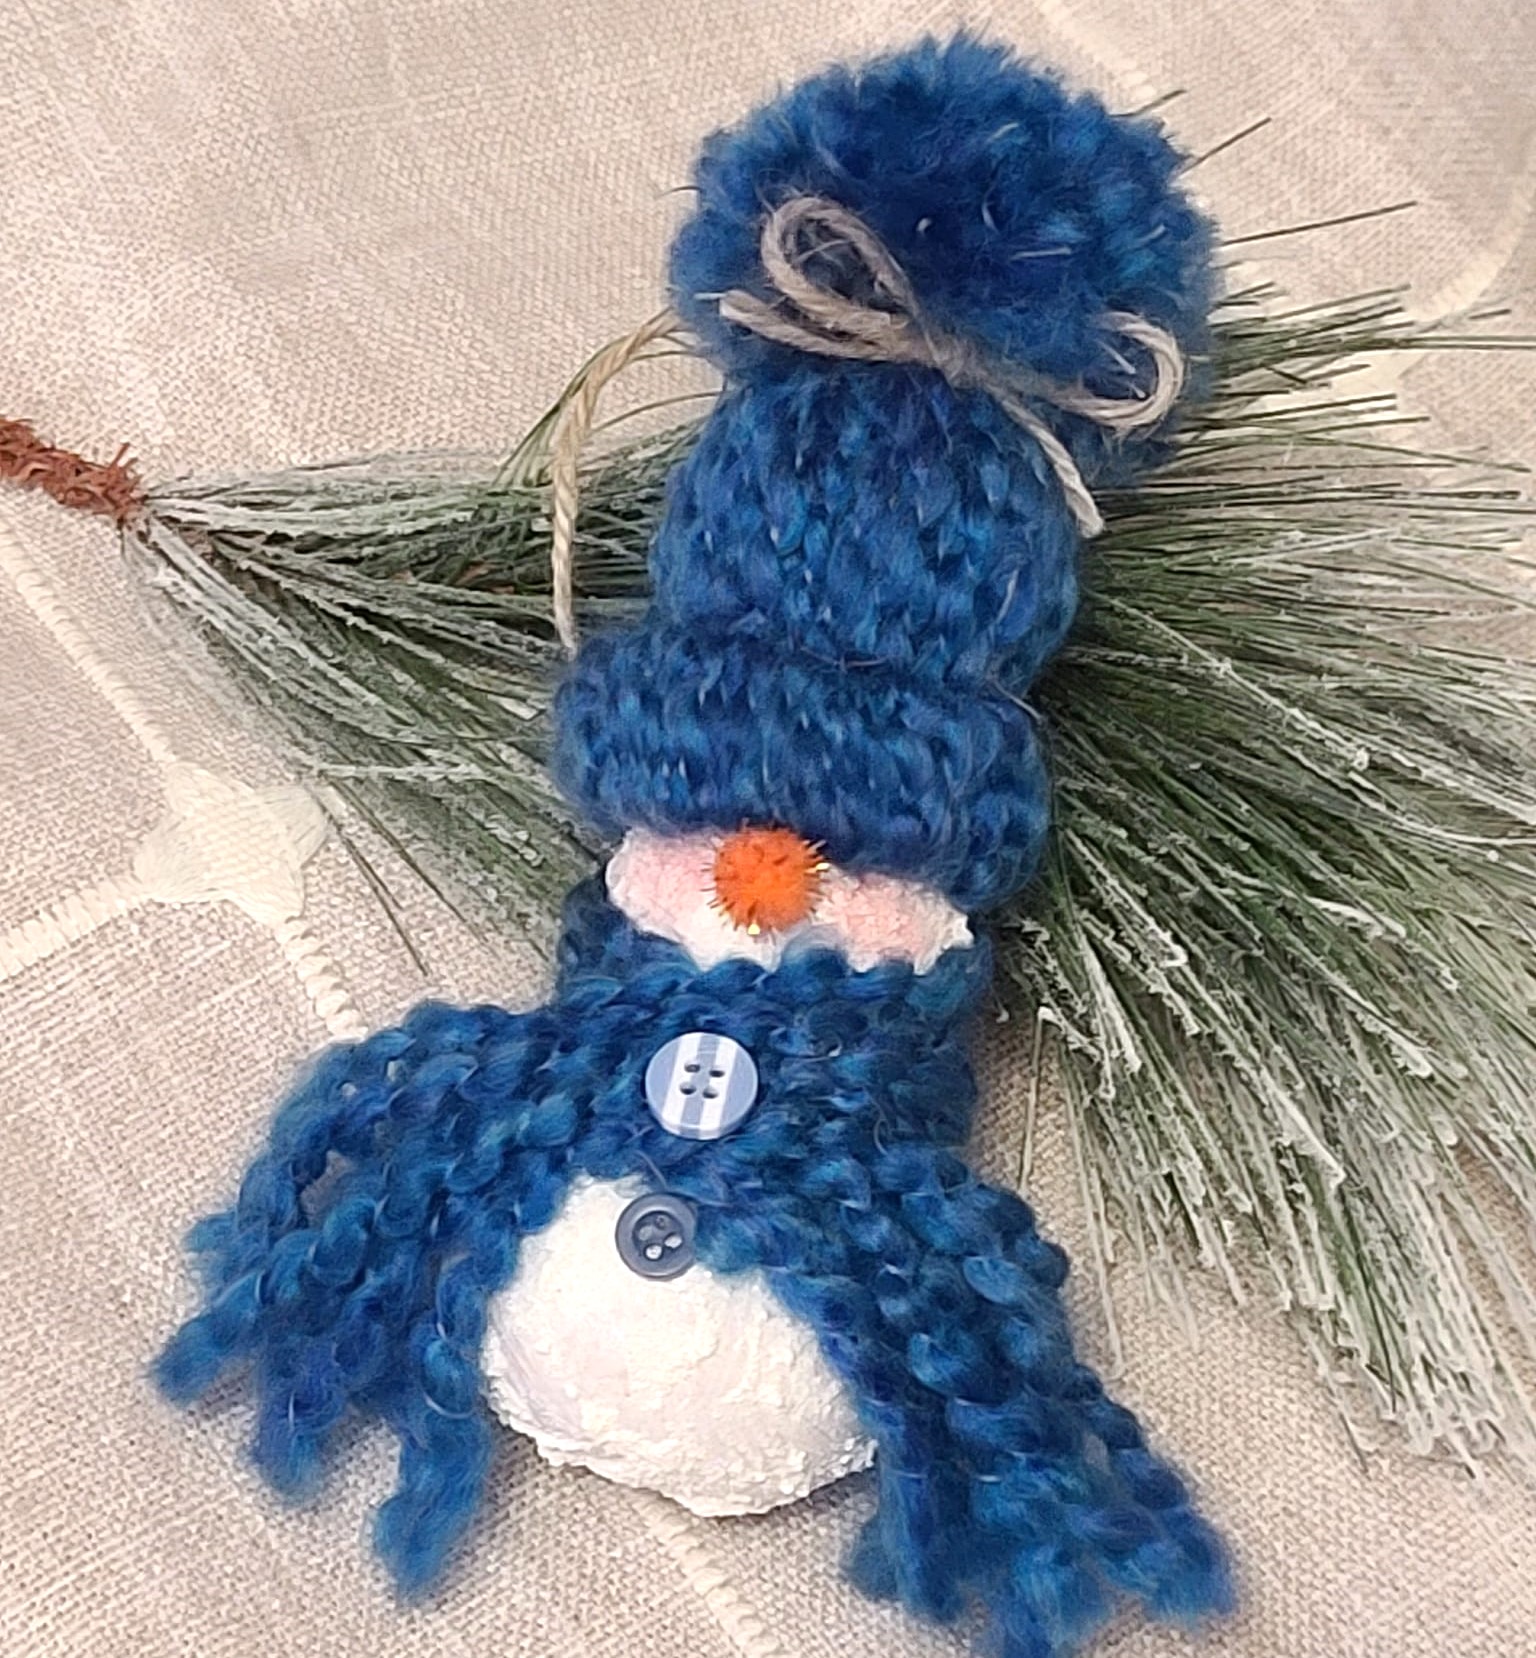 Handpainted gourd snowman ornament with knit hat - multi blue